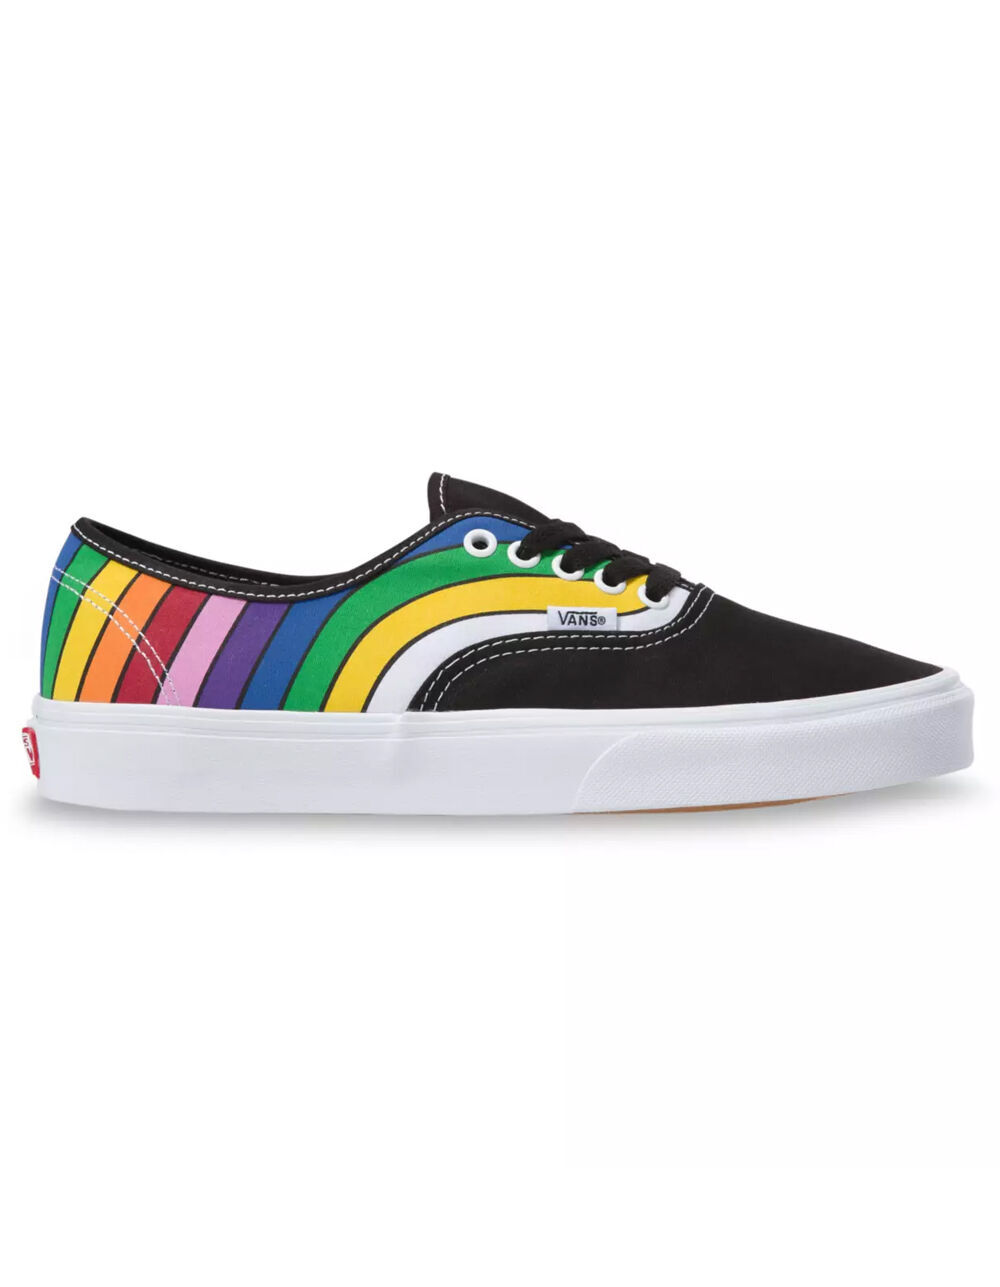 VANS Refract Authentic Shoes image number 1